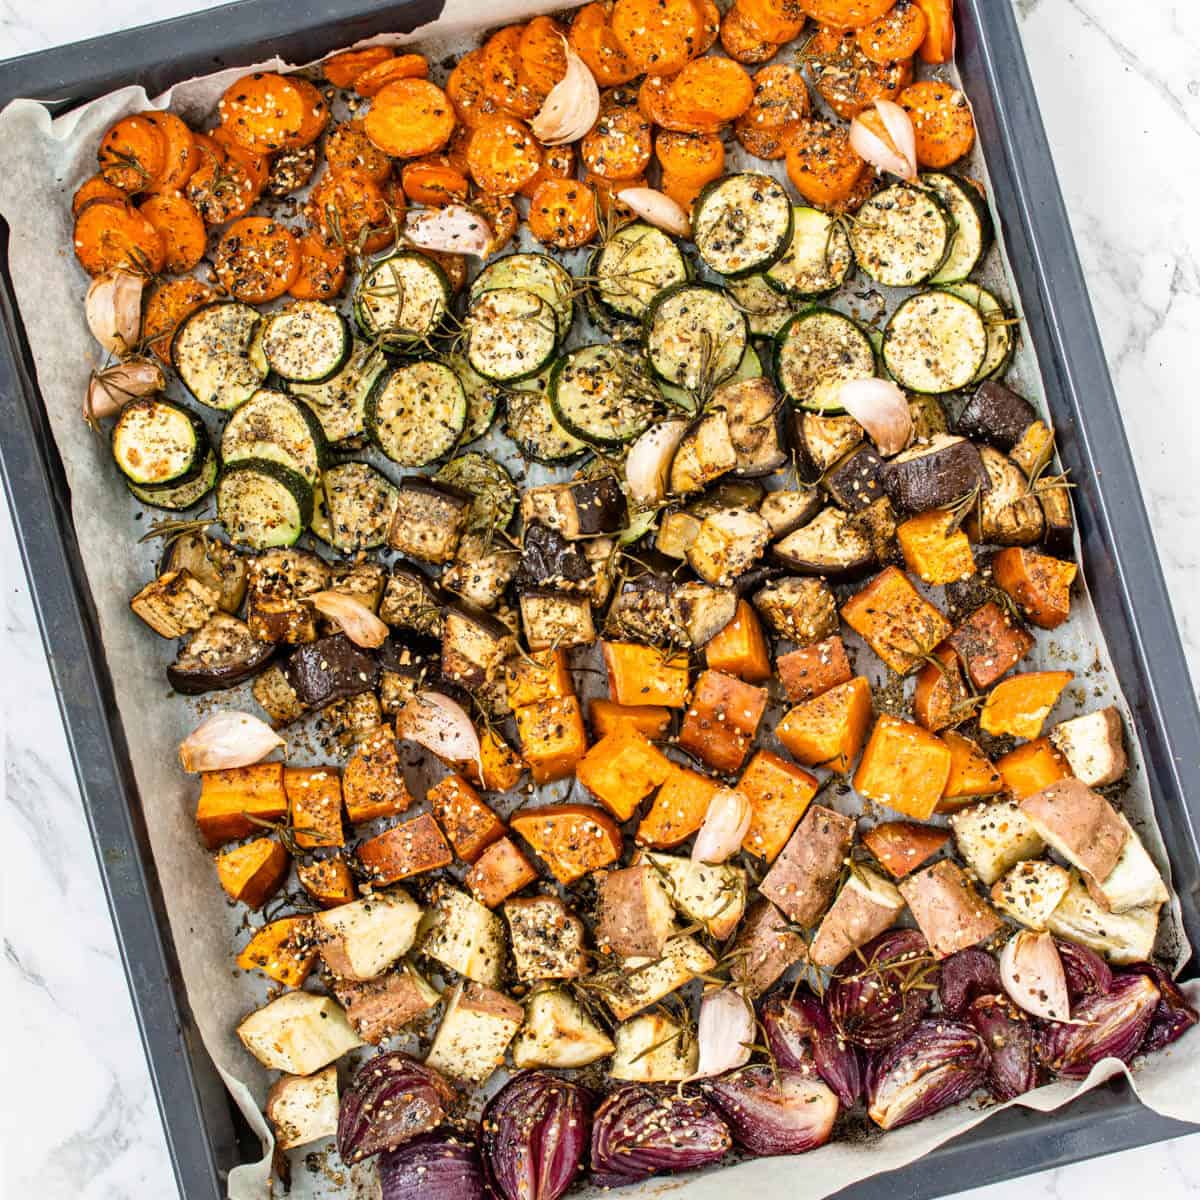 Oven Roasted Vegetables - Cooking With Ayeh